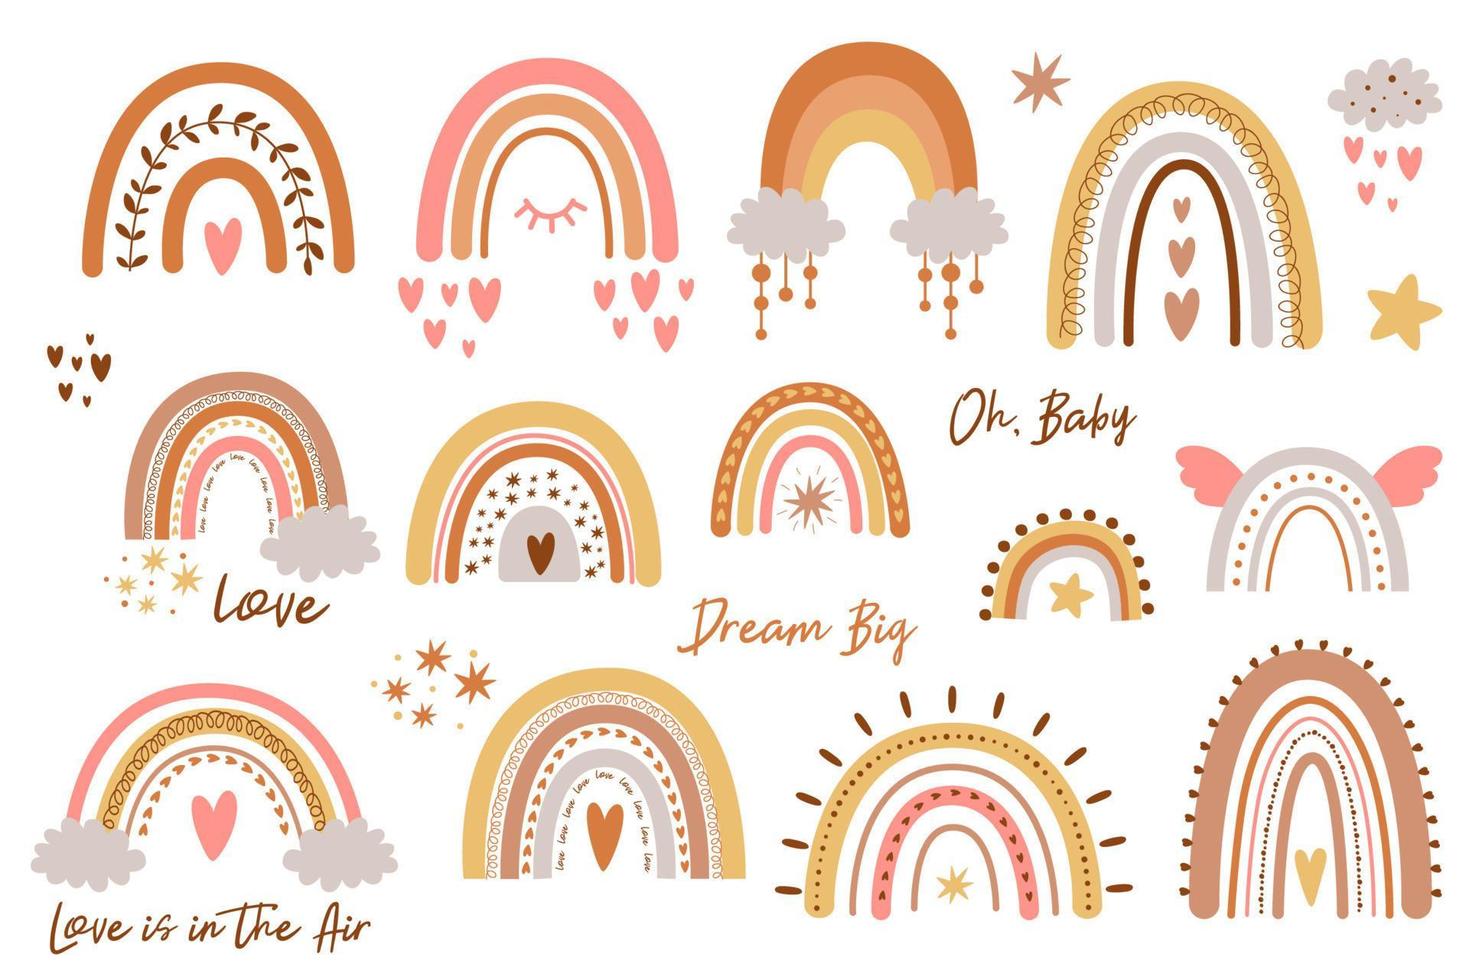 Baby rainbow set. Rainbow kids design pastel shapes Hand drawn cute rainbows collection doodle sweet elements. Boho rainbow vector illustration isolated shapes. Baby shower decor, clouds, star, heart.